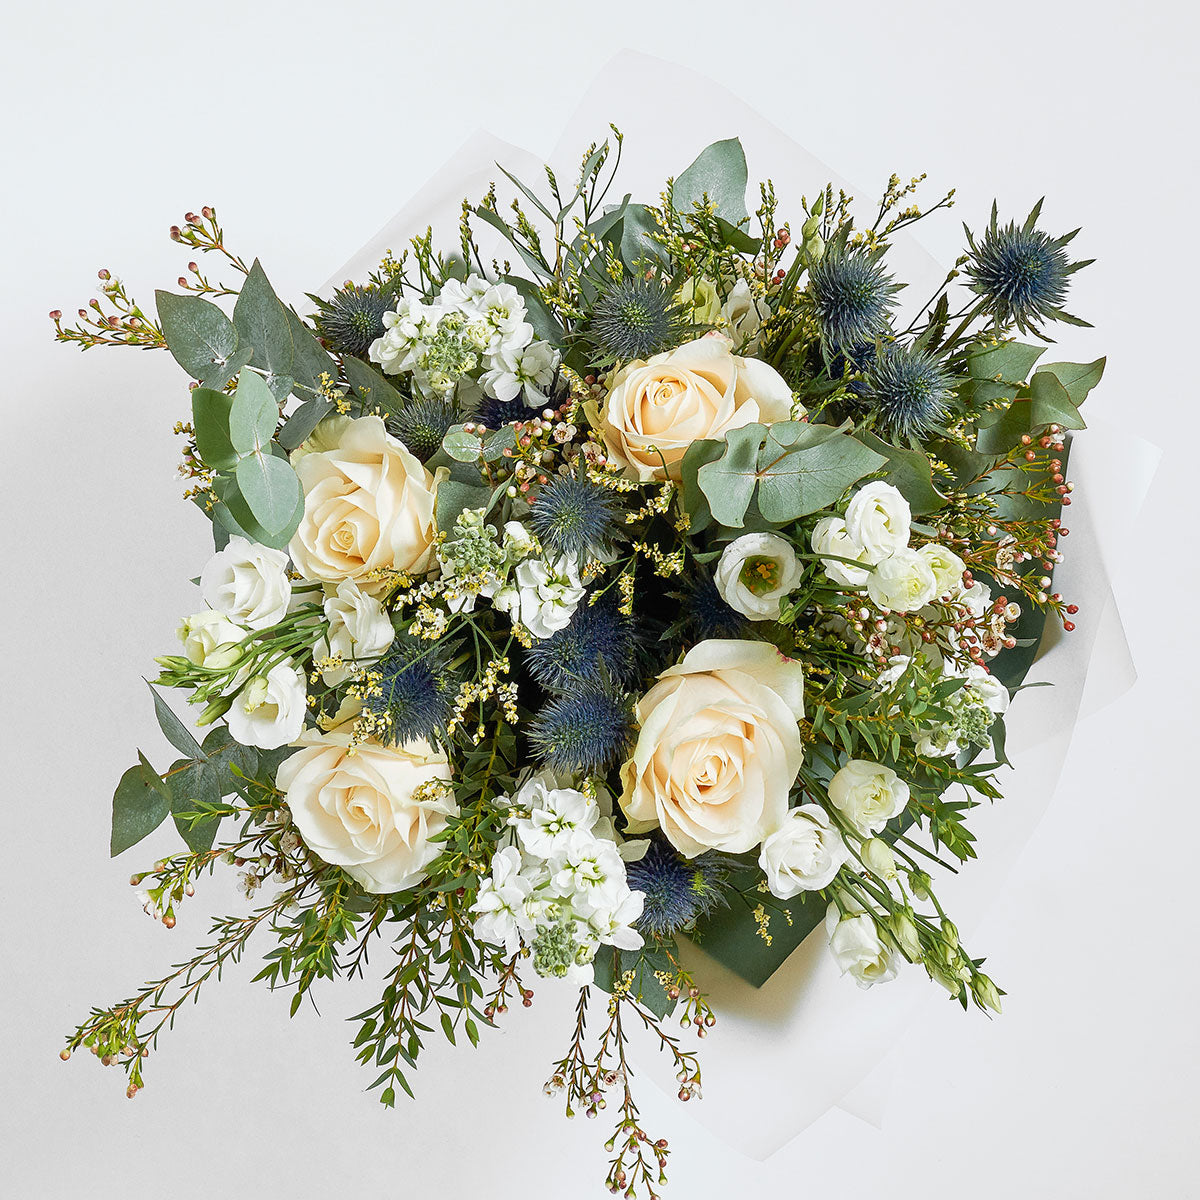 classic white bouquet with white roses and eucalyptus for delivery in London and UK Nationwide